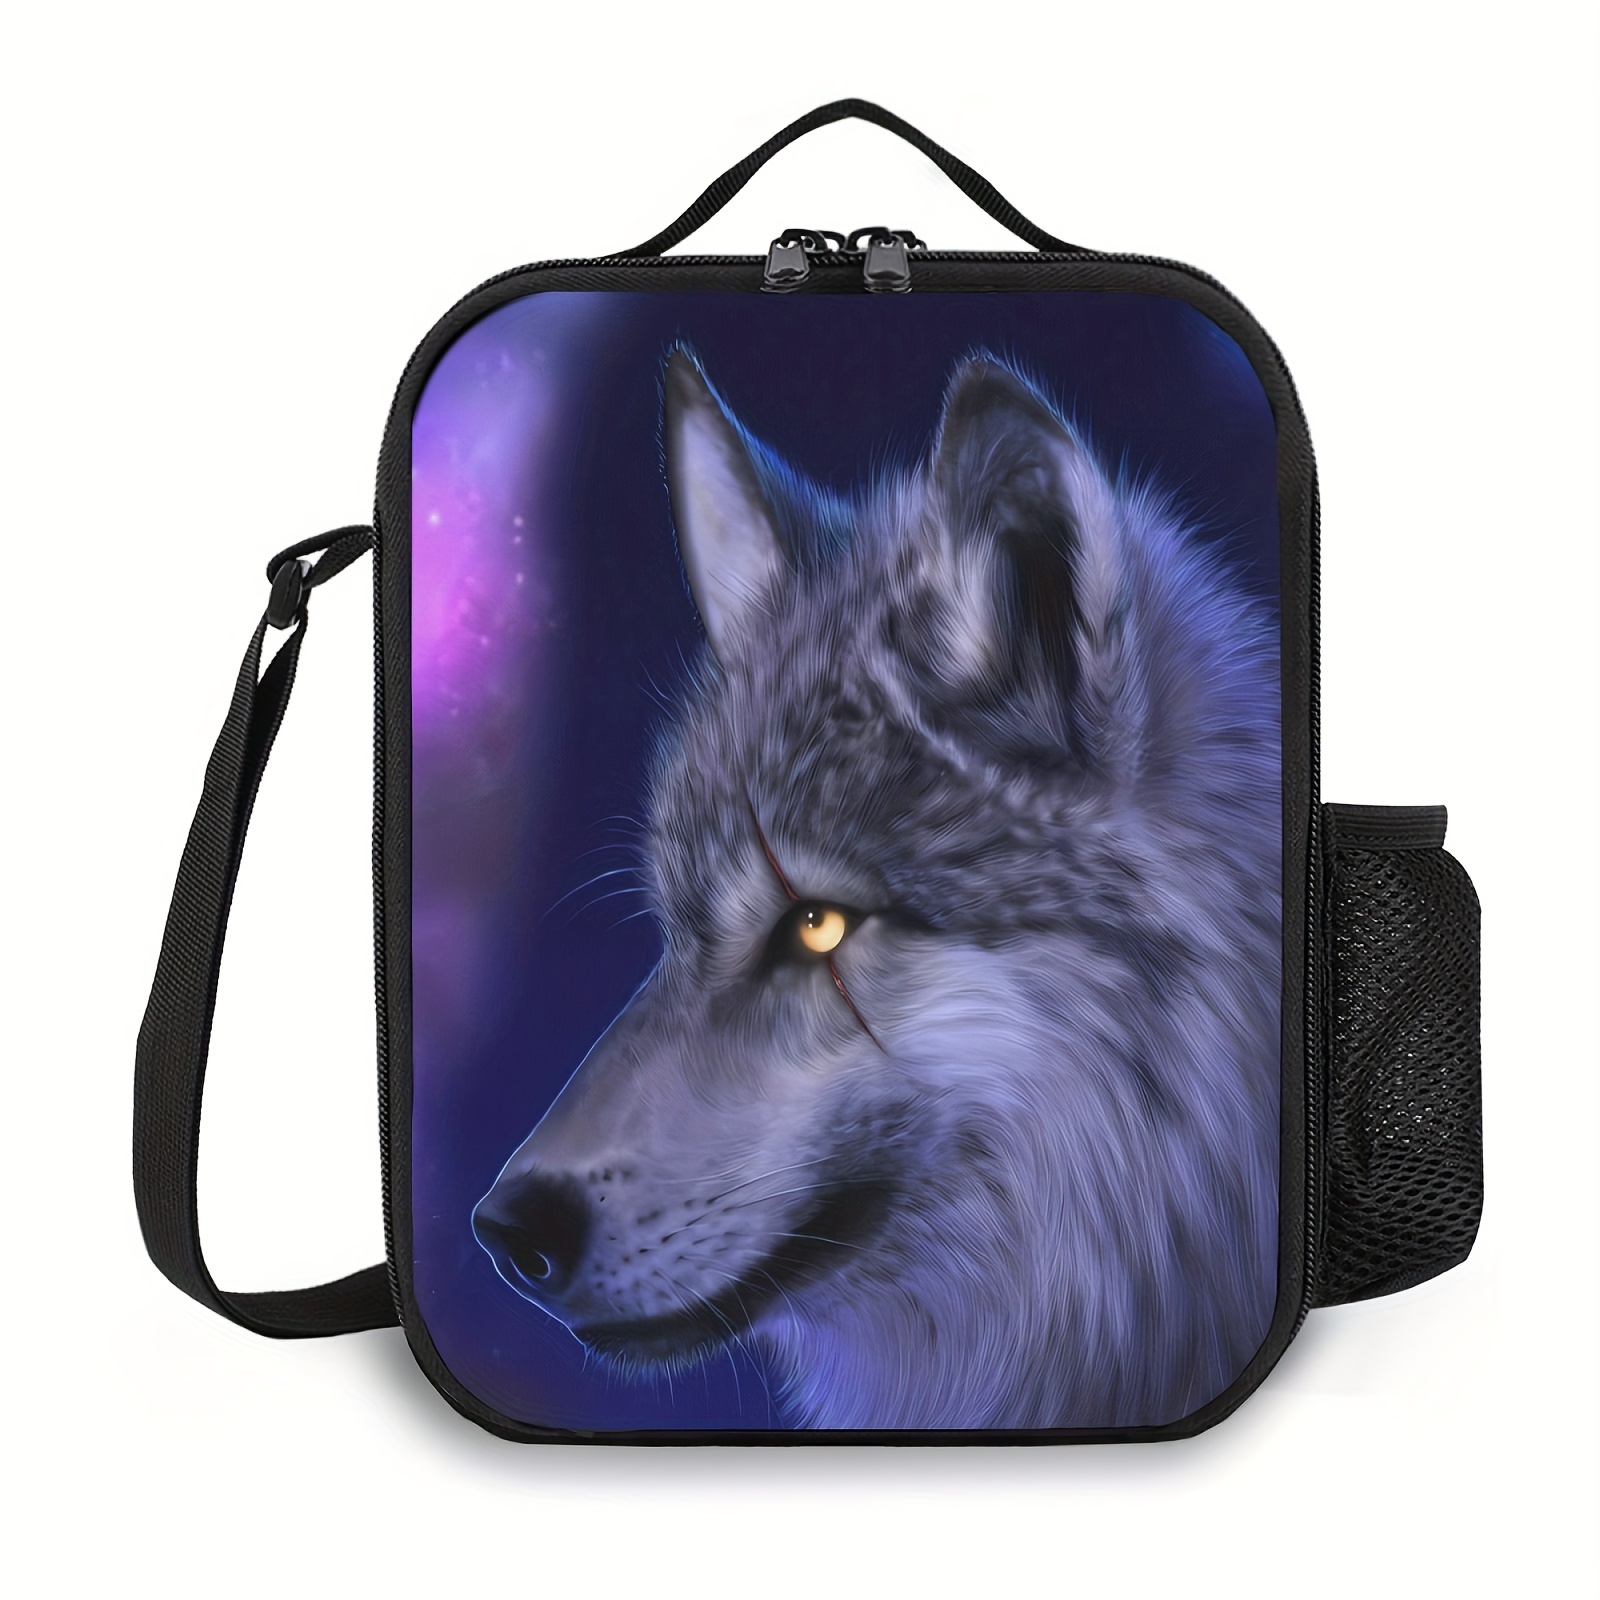 Wolf Lunch Box Insulated Food Container Meal Bag Lunch Bag For